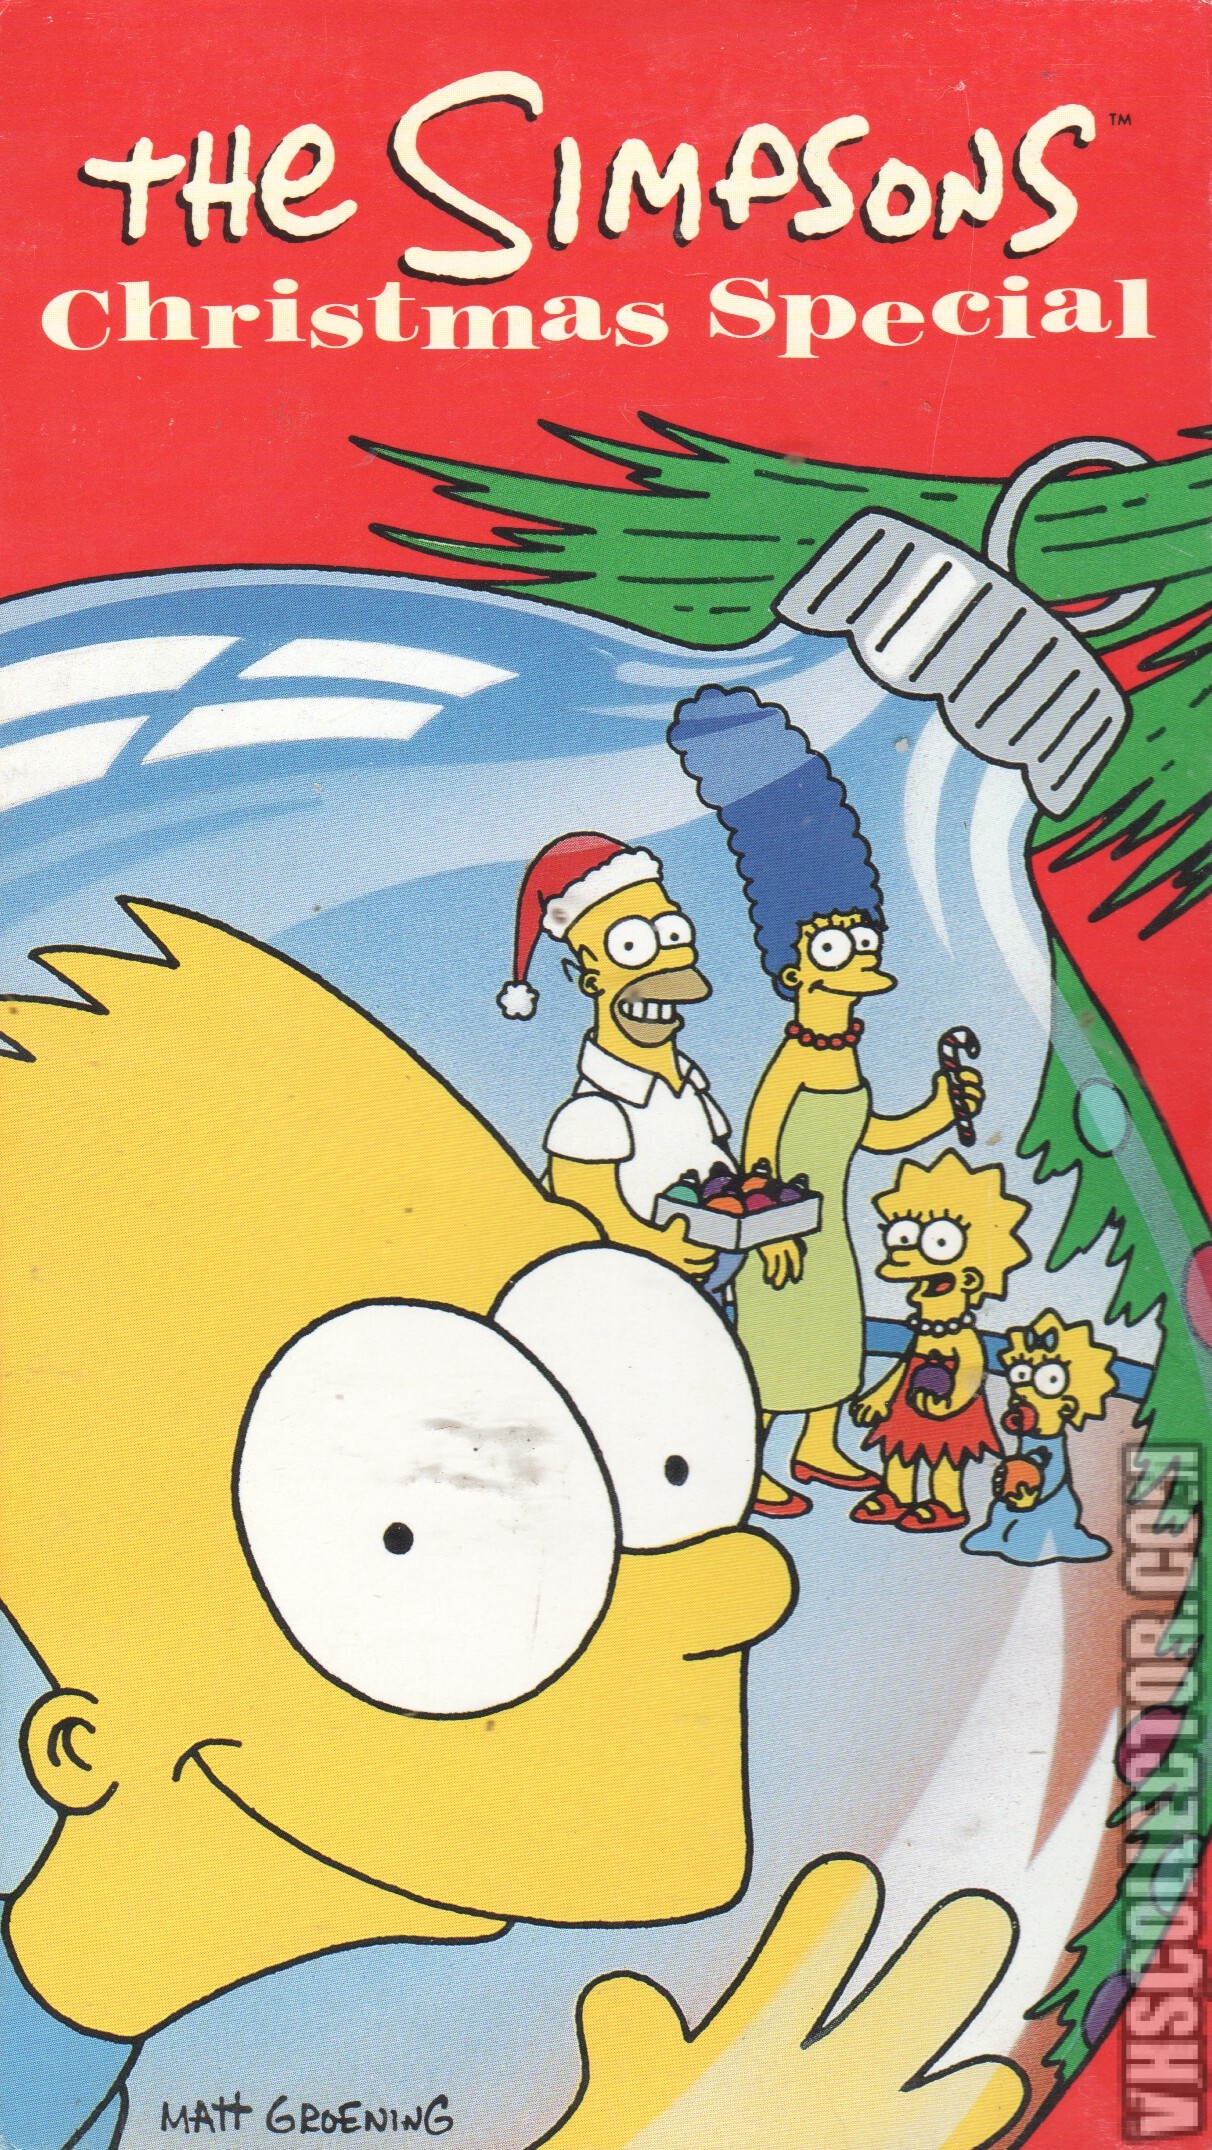 28524_The%2520Simpsons%2520Christmas%2520Special%2520VHS%2520Front%2520Cover.jpg